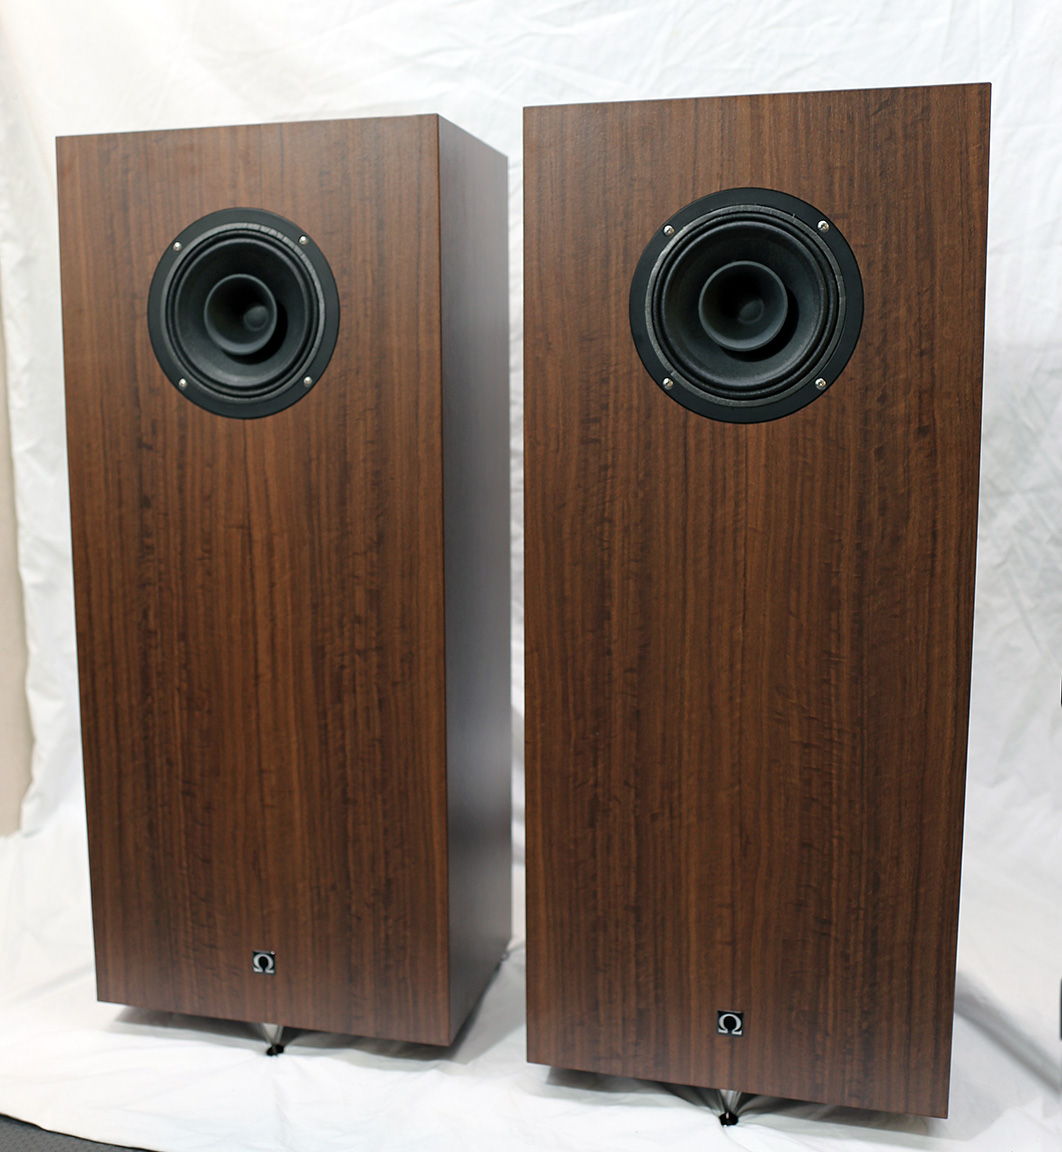  Proprietary alignments (cabinet tuning) and cabinet design, triple-layer cabinet construction, plus a finish laminate layer. This wood sandwich virtually eliminates sound degrading cabinet resonances.